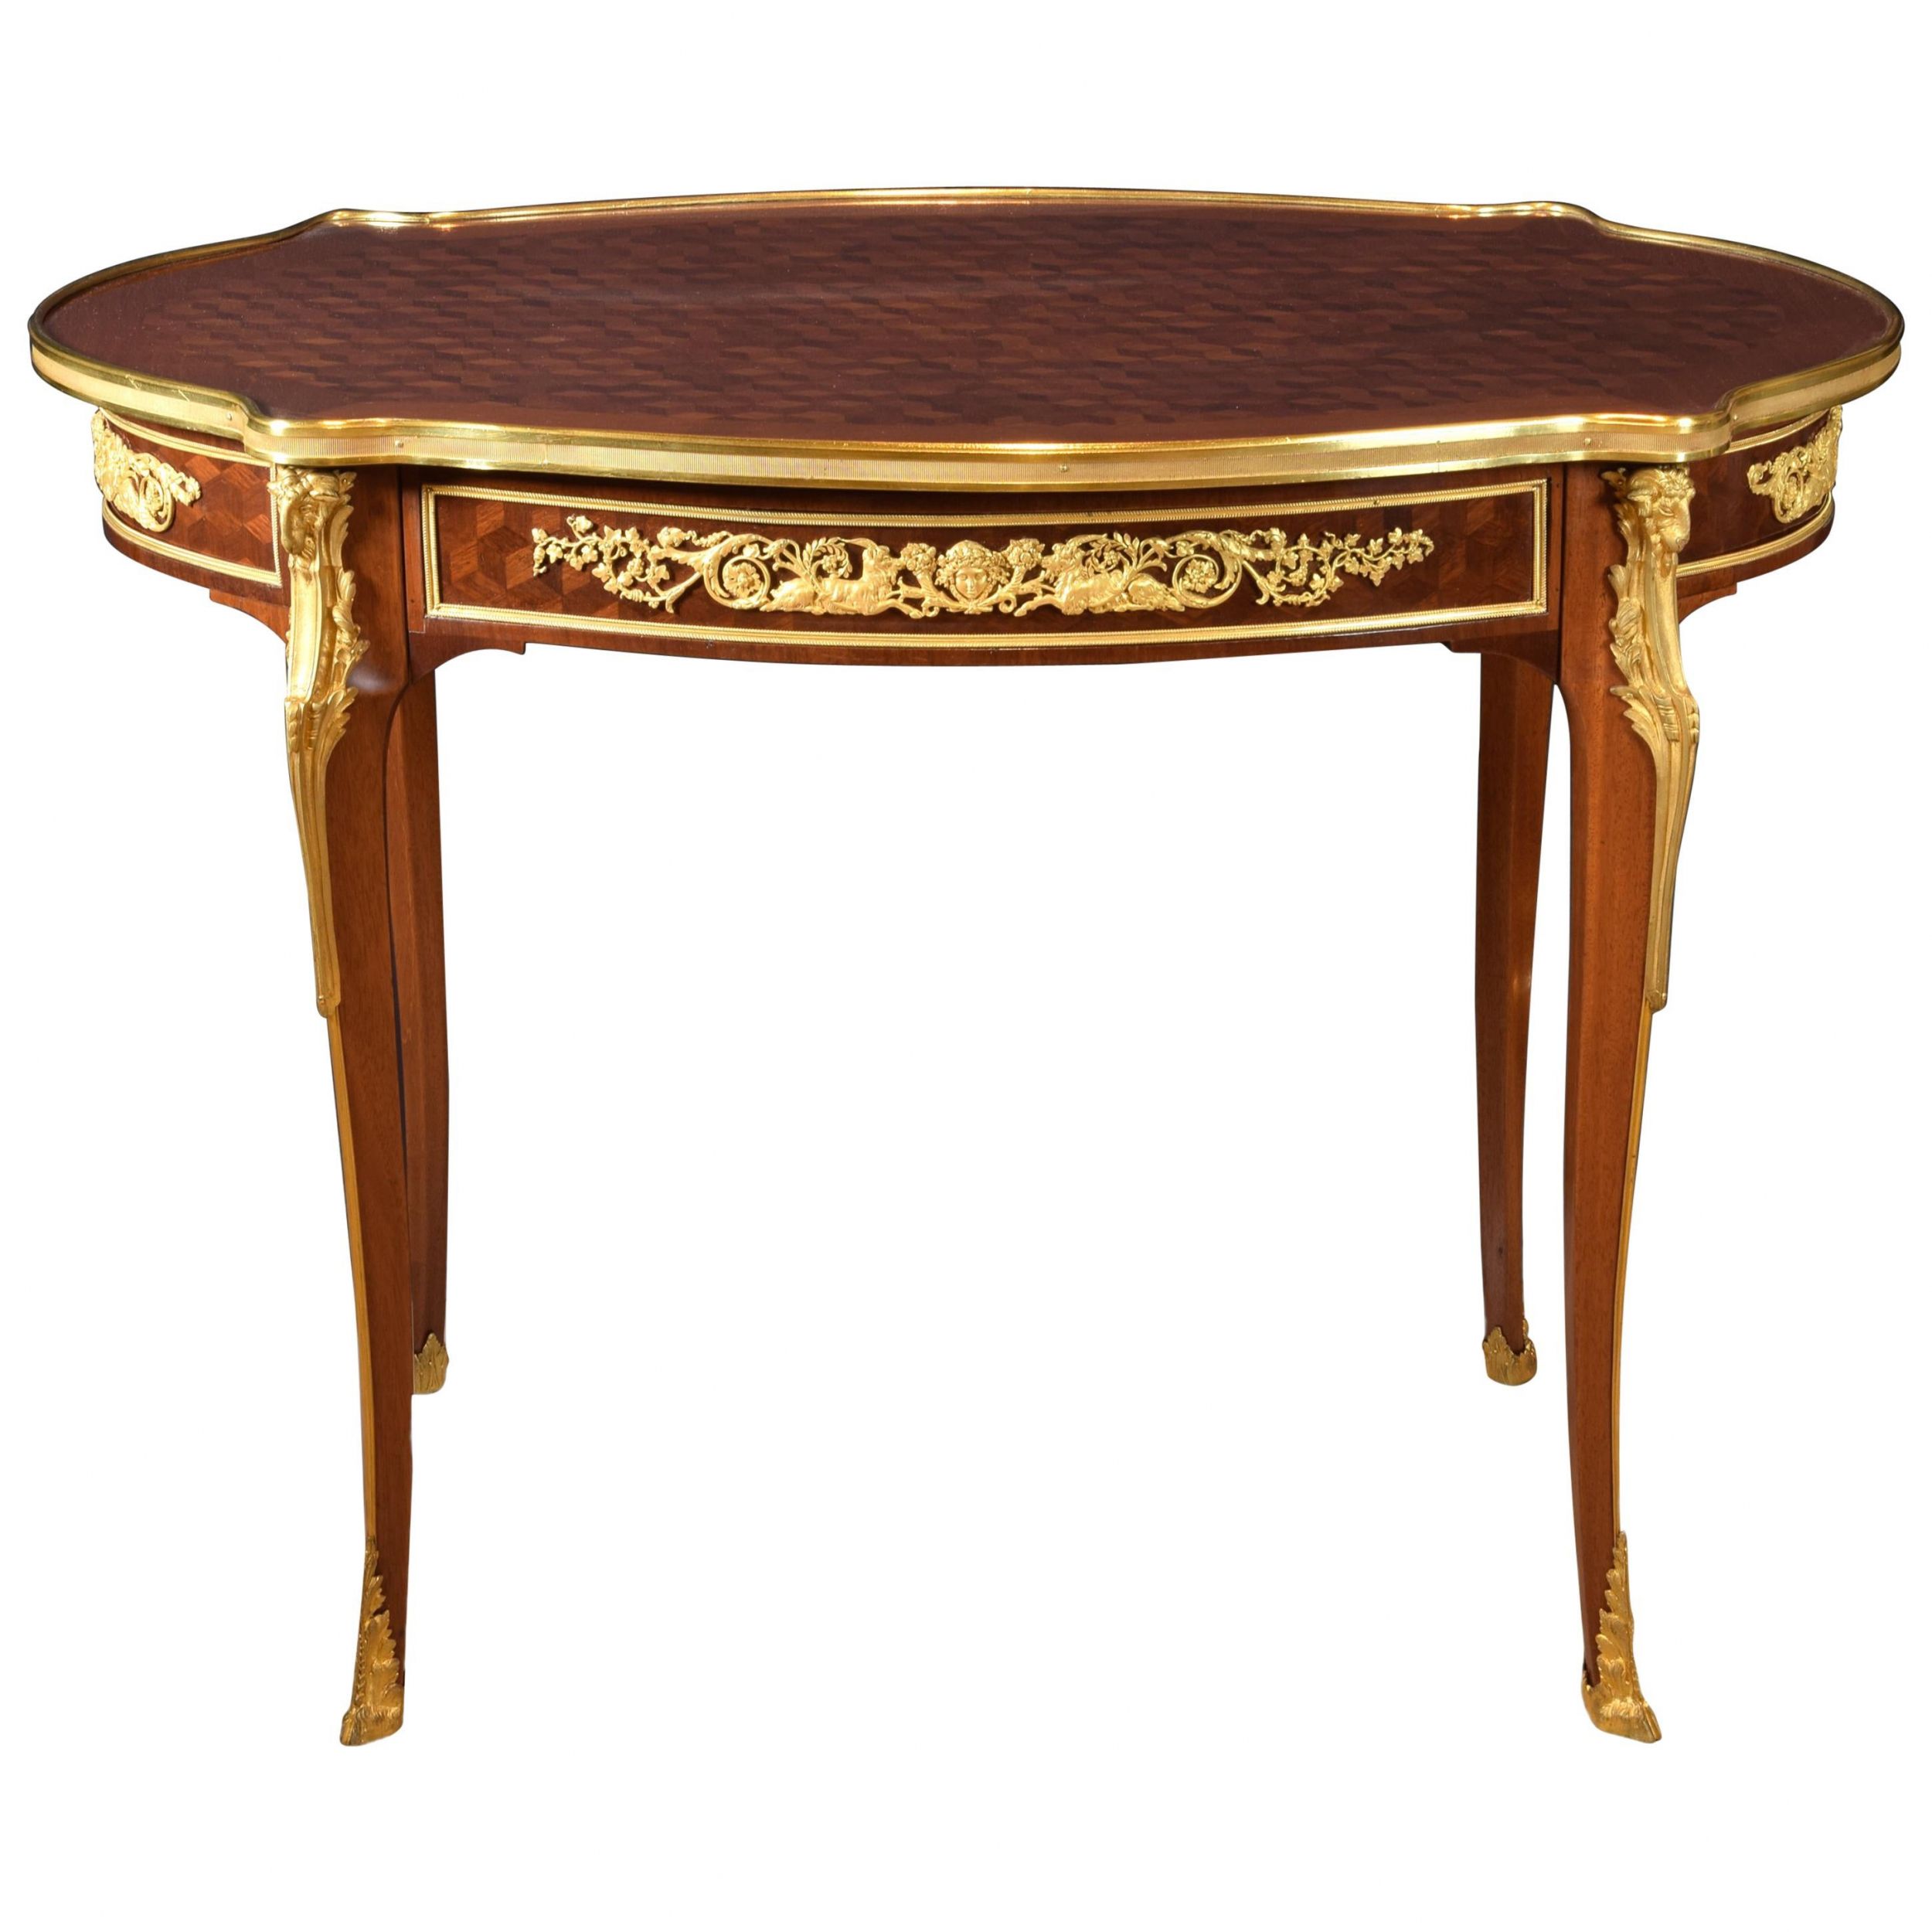 Louis-XVI-style-oval-coffee-table-after-Adam-Weisweiler-France-19th-century